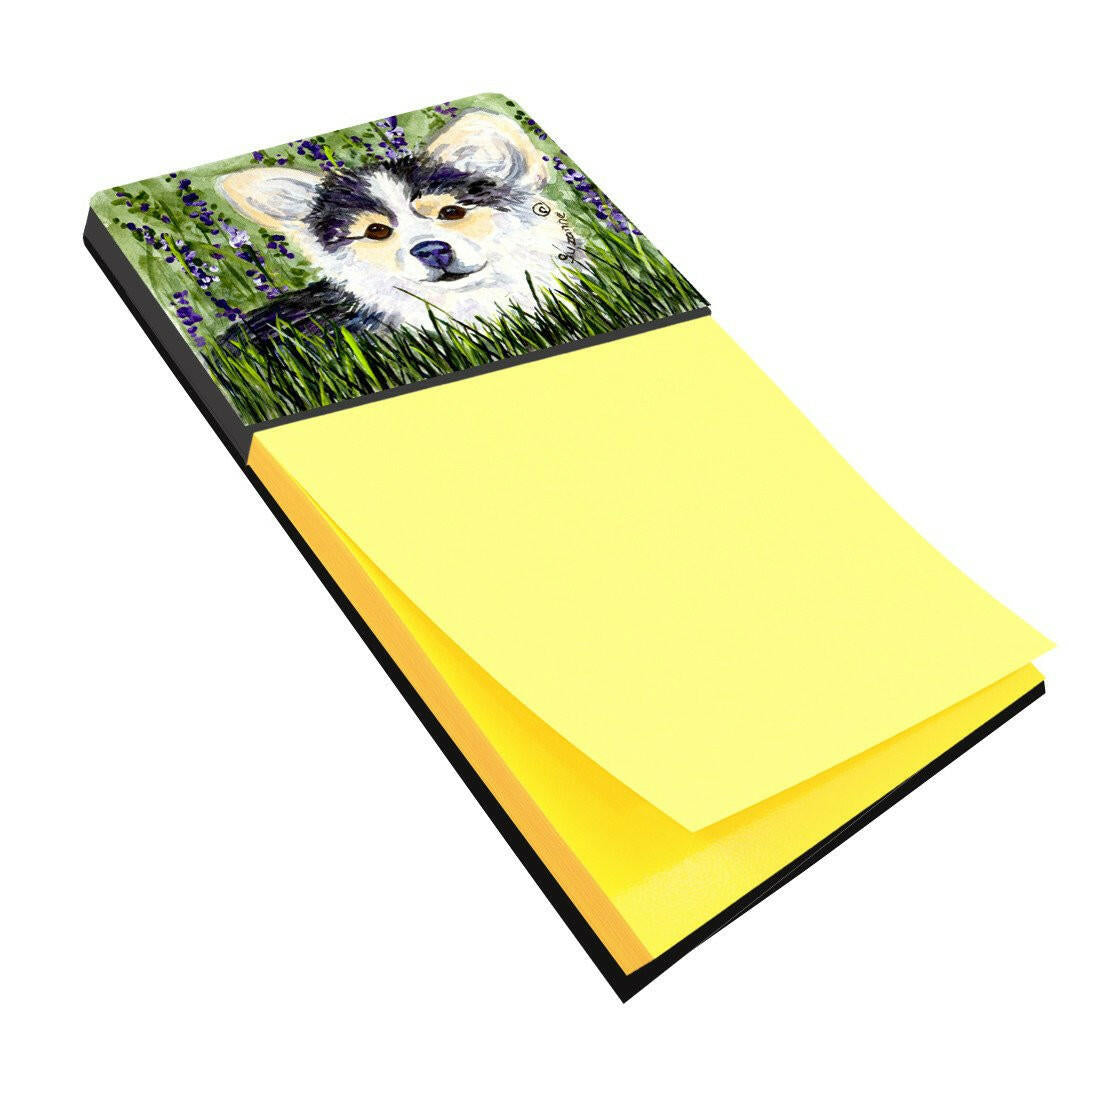 Chihuahua Refiillable Sticky Note Holder or Postit Note Dispenser SS8824SN by Caroline's Treasures